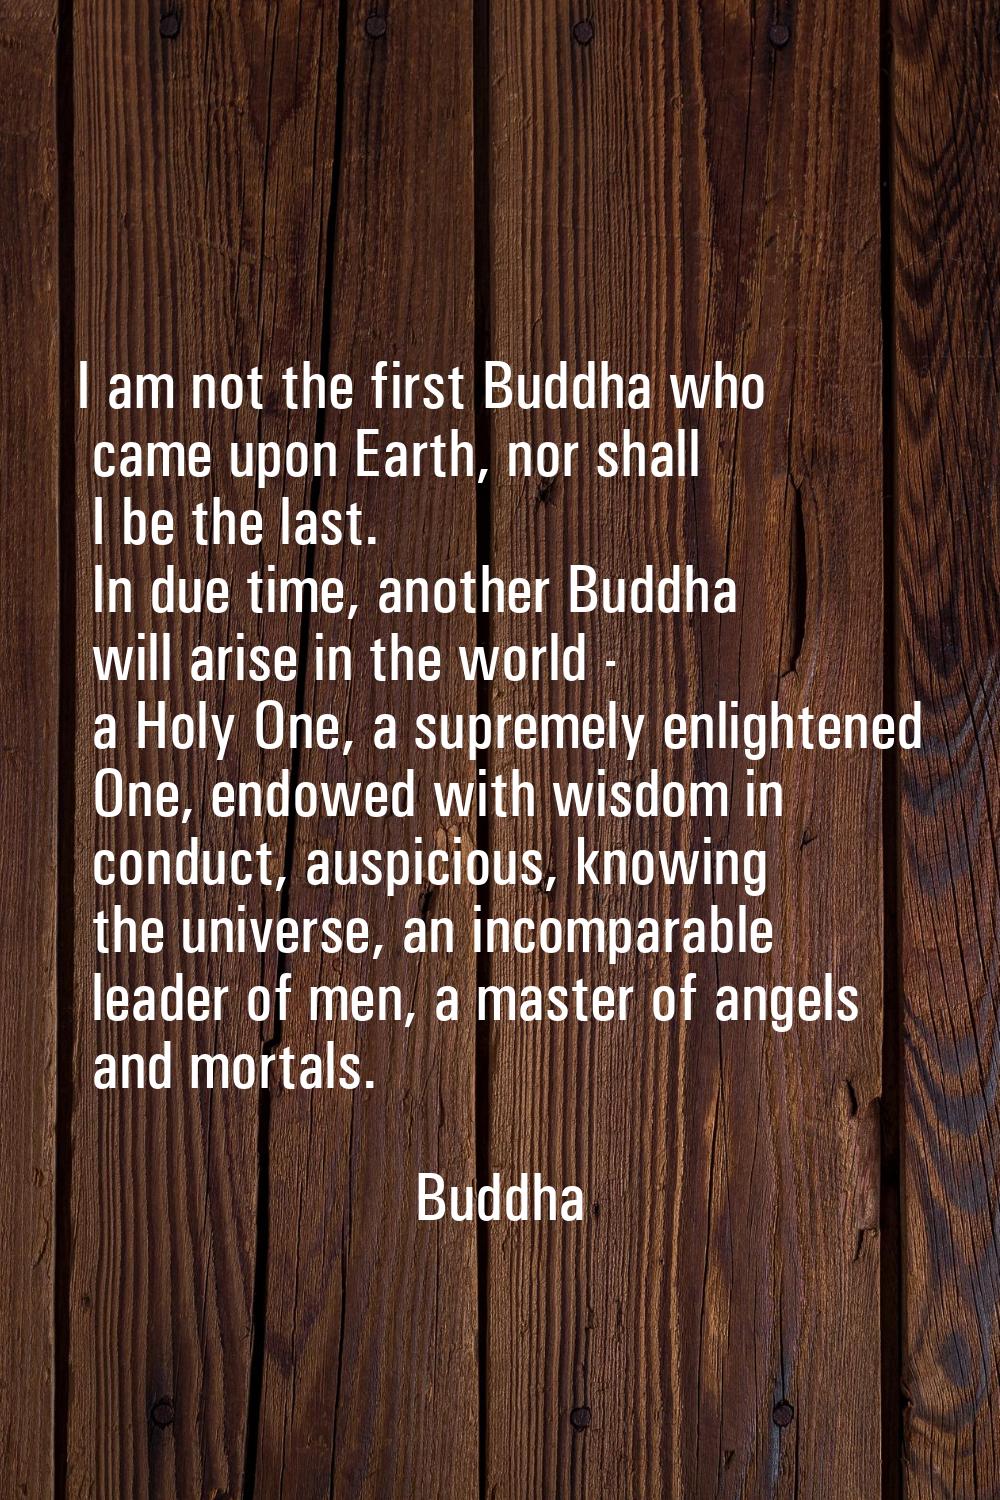 I am not the first Buddha who came upon Earth, nor shall I be the last. In due time, another Buddha